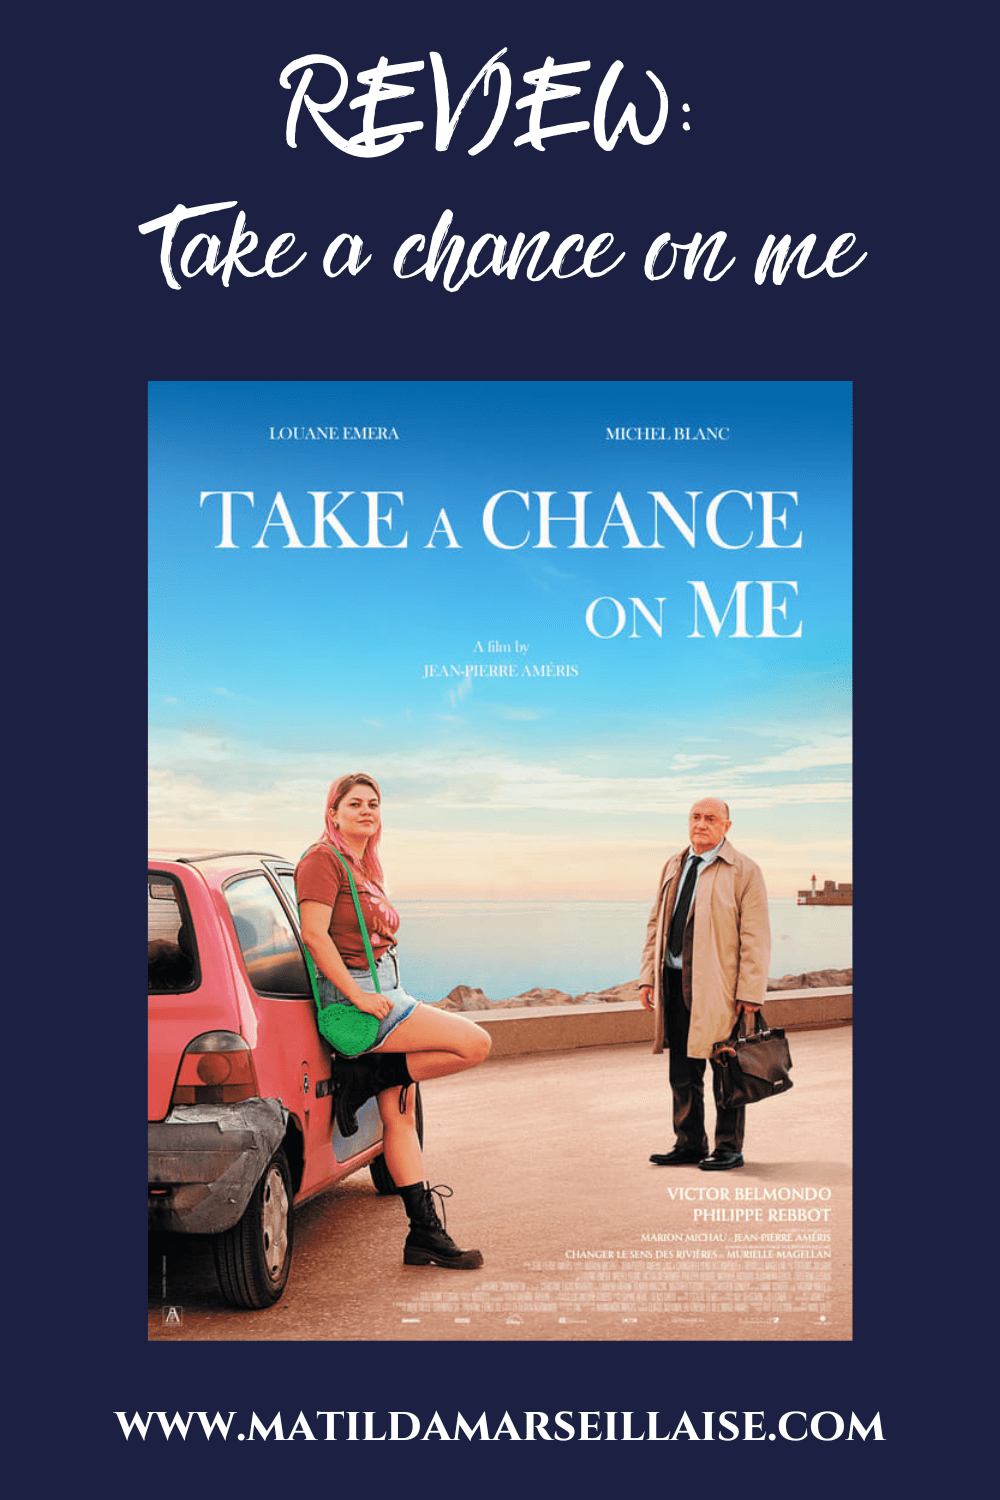 Take a chance on me is a heartwarming film about turning your luck around and seeing your full potential